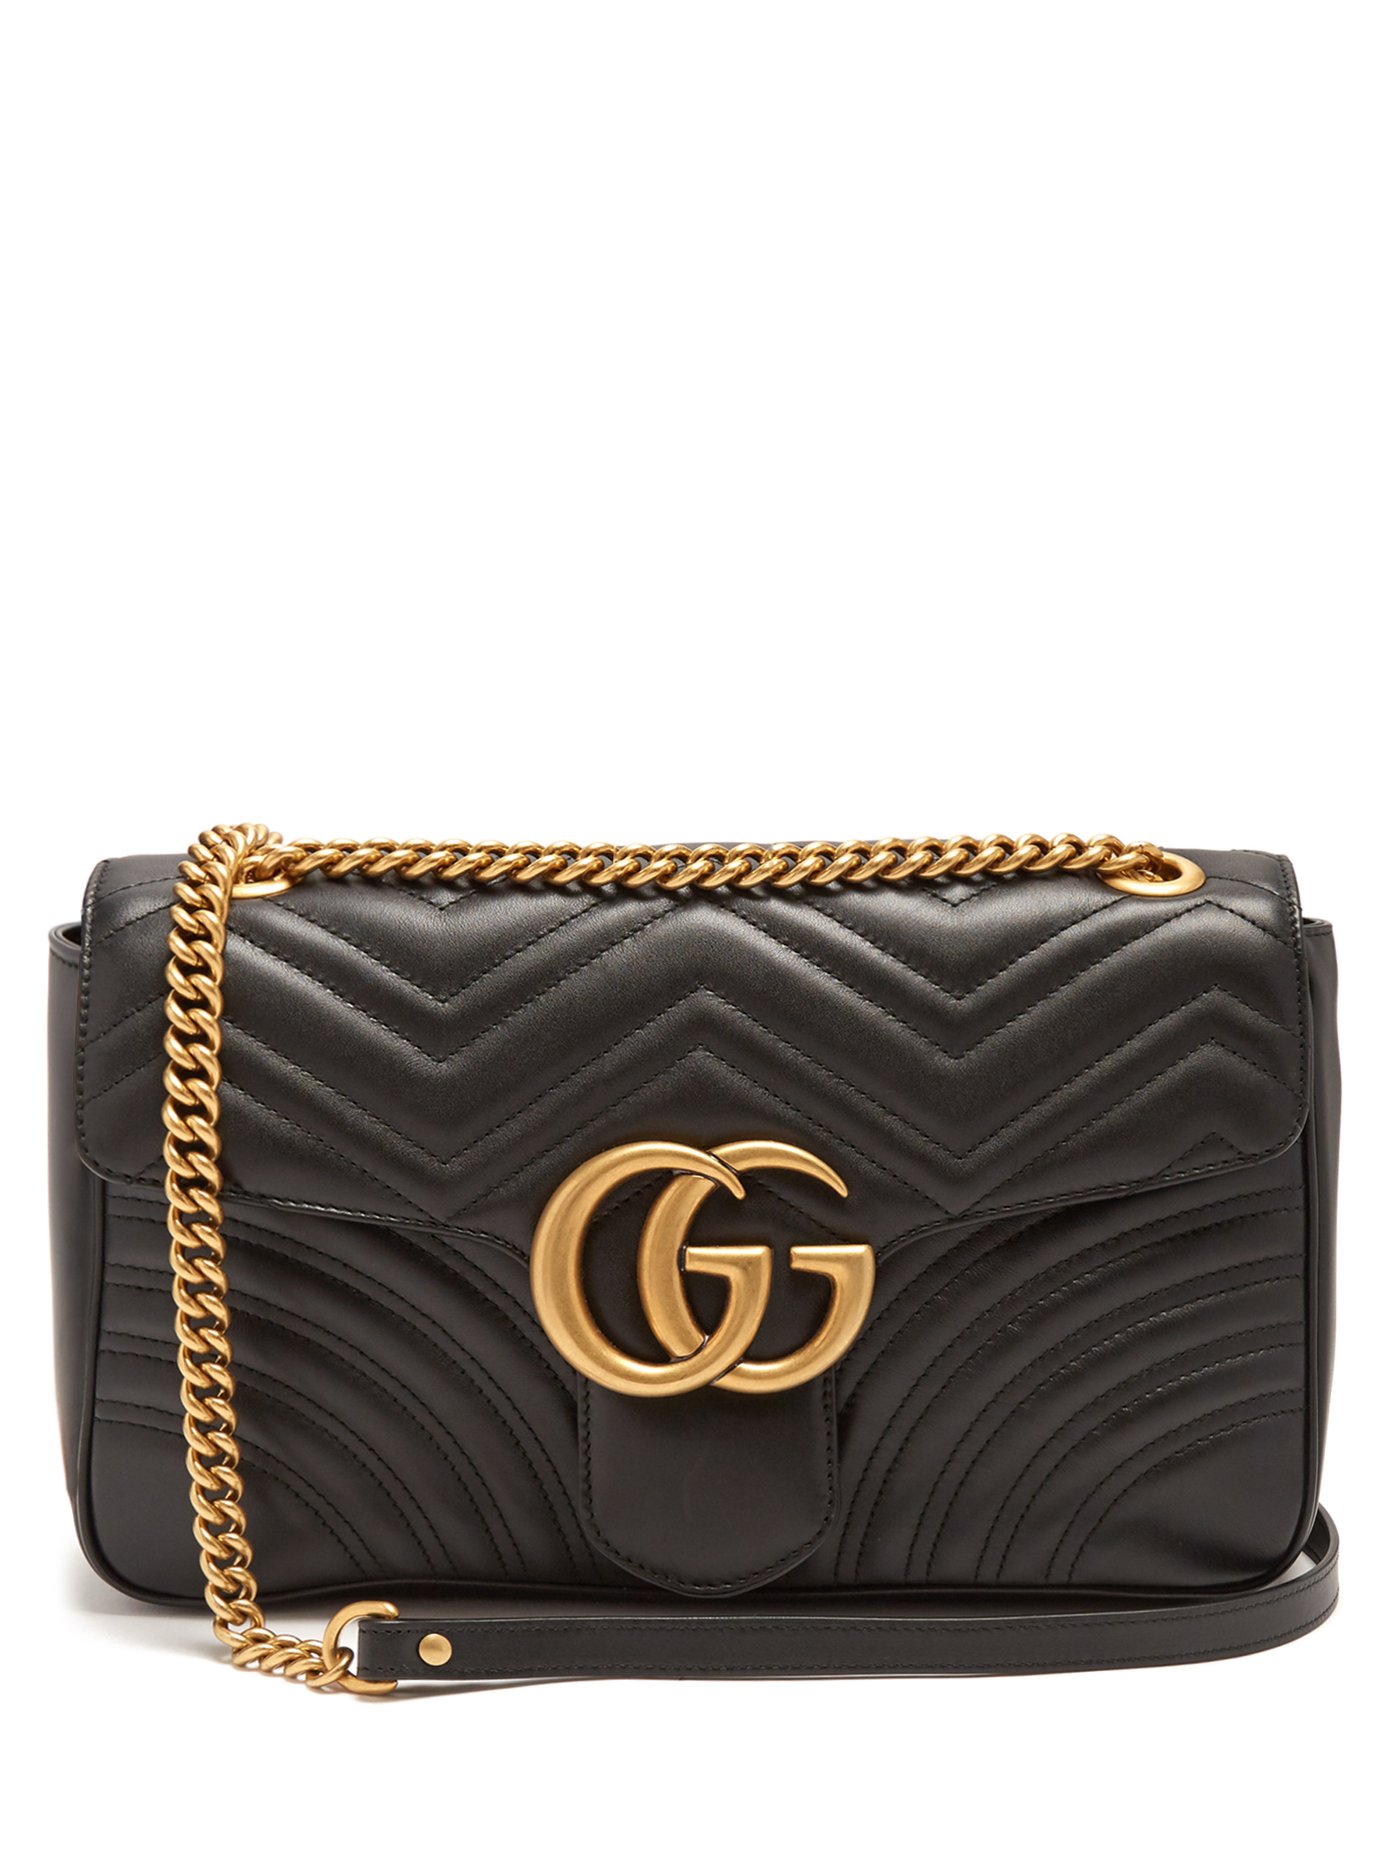 GG Marmont medium quilted-leather 